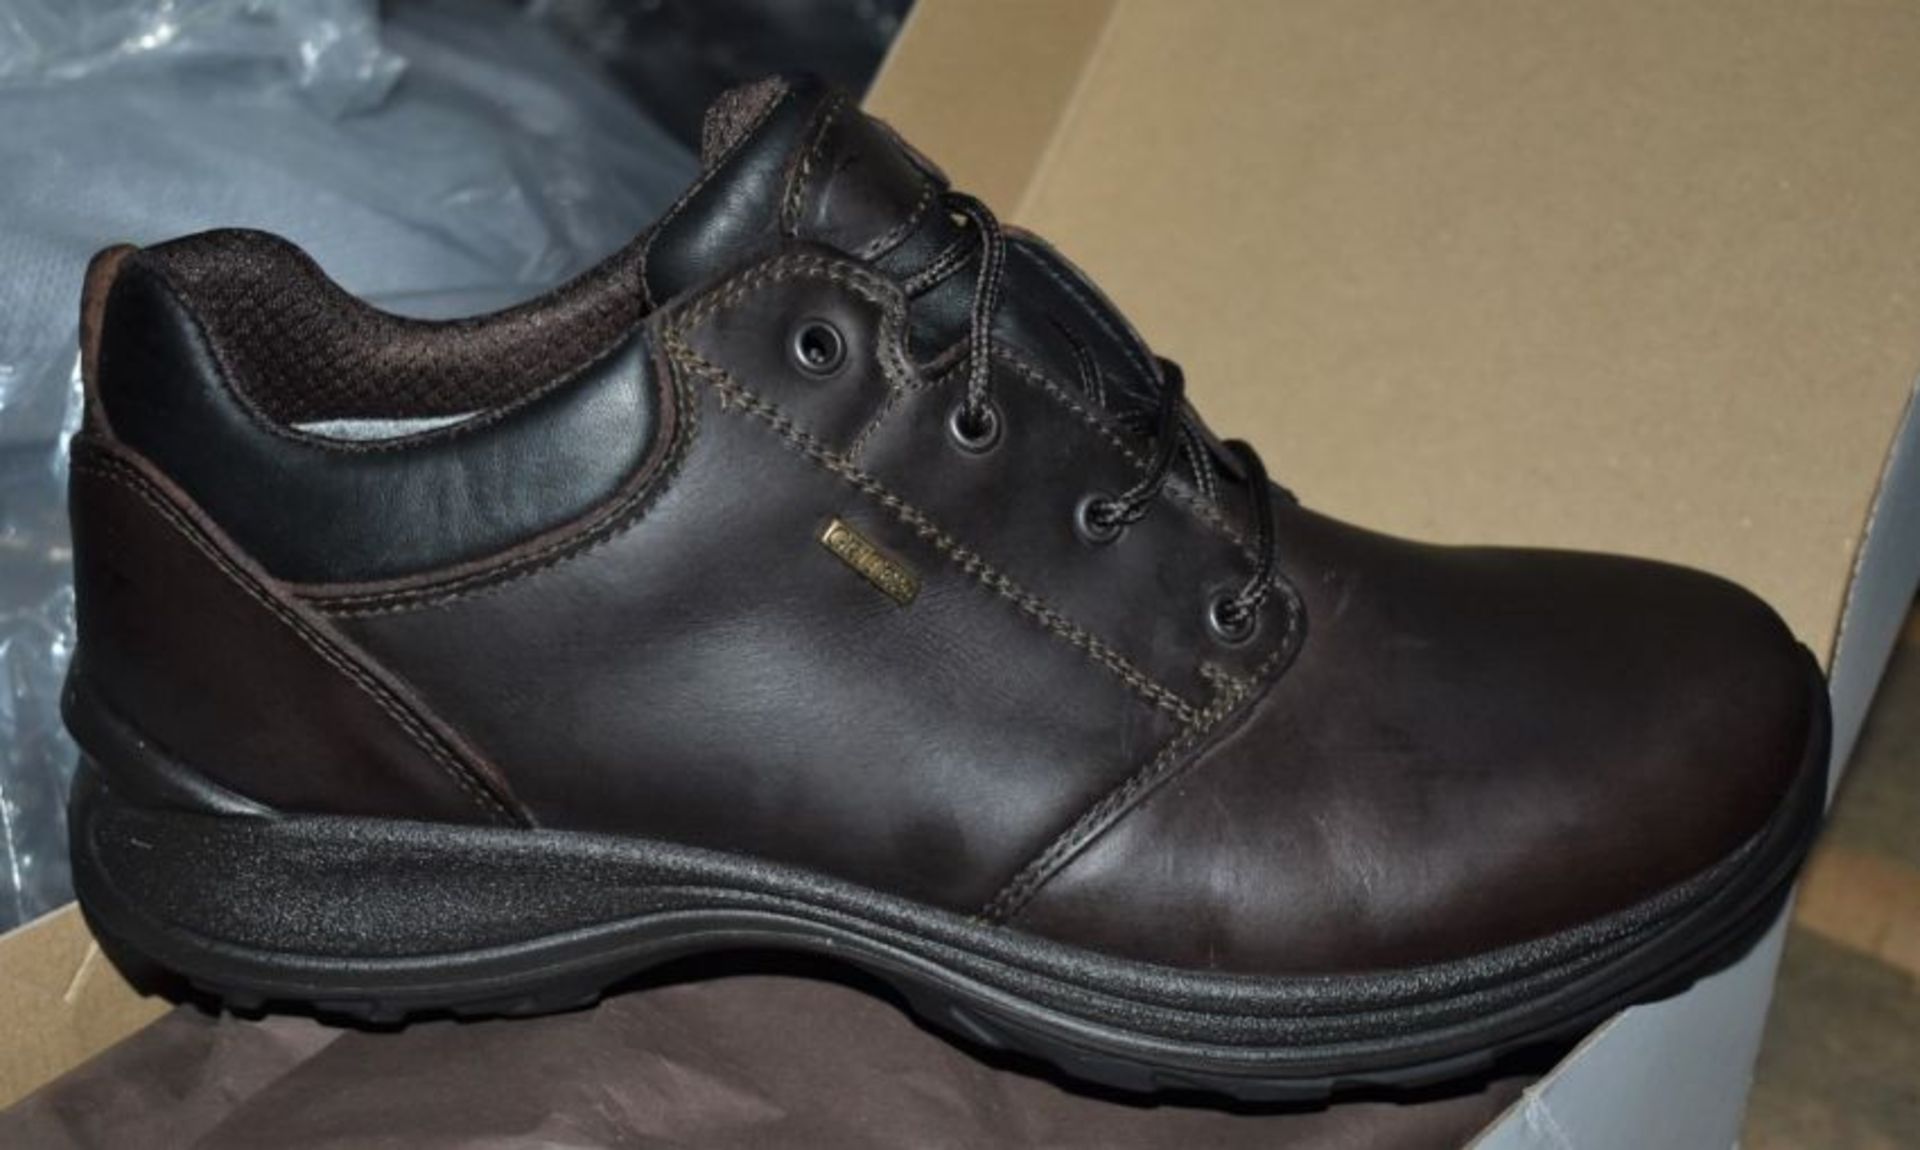 1 x Pair of Men's Grisport Brown Leather GriTex Shoes - Rogerson Footwear - Brand New and Boxed - - Image 6 of 6